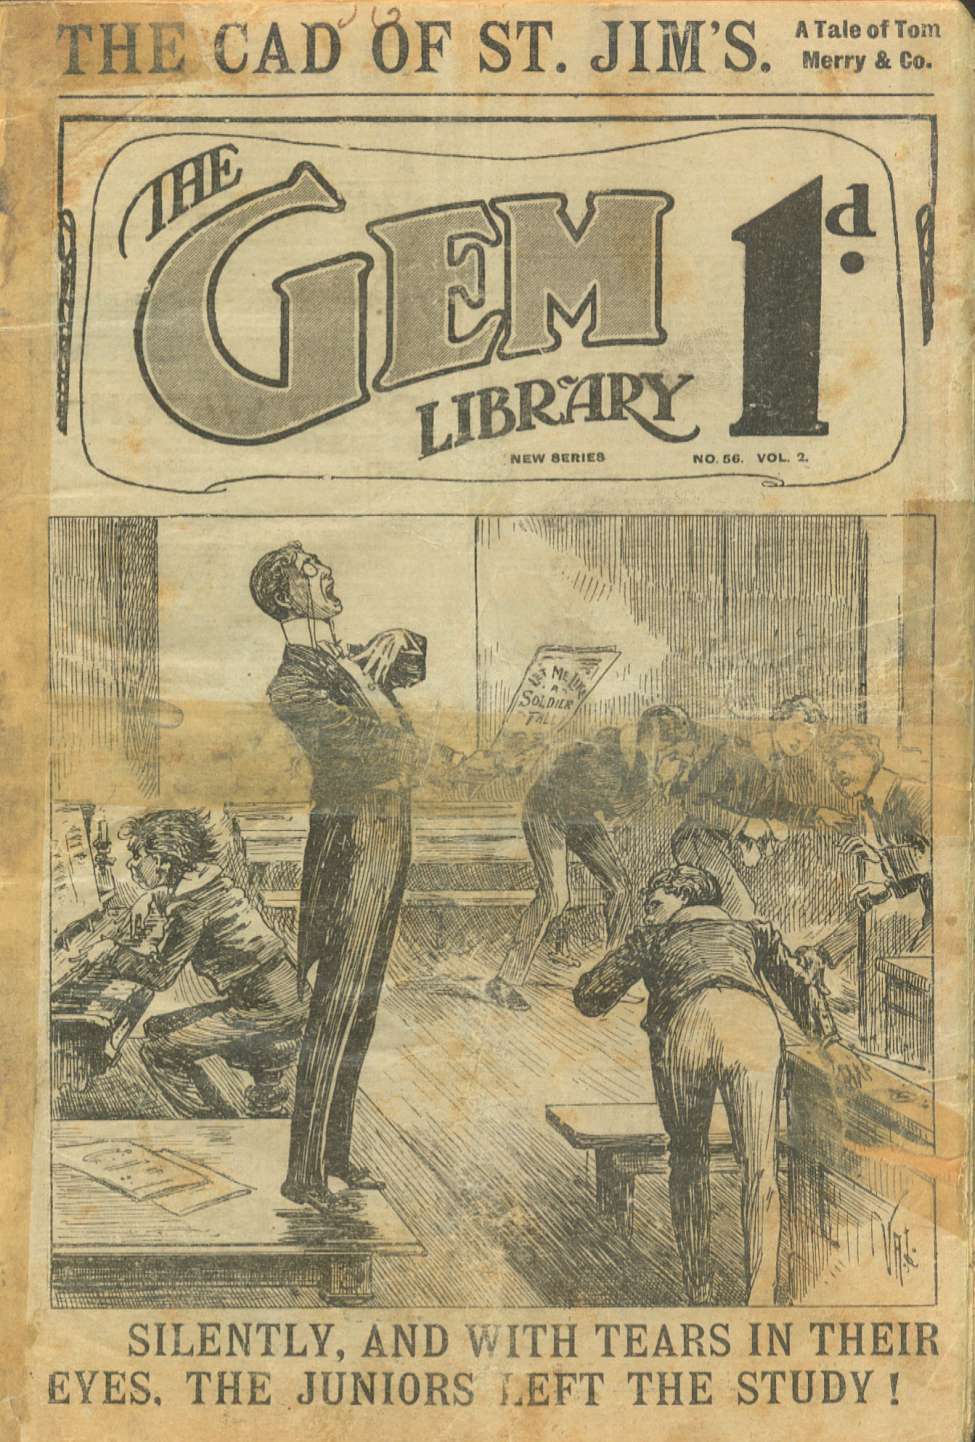 Comic Book Cover For The Gem v2 56 - The Cad of St. Jim’s